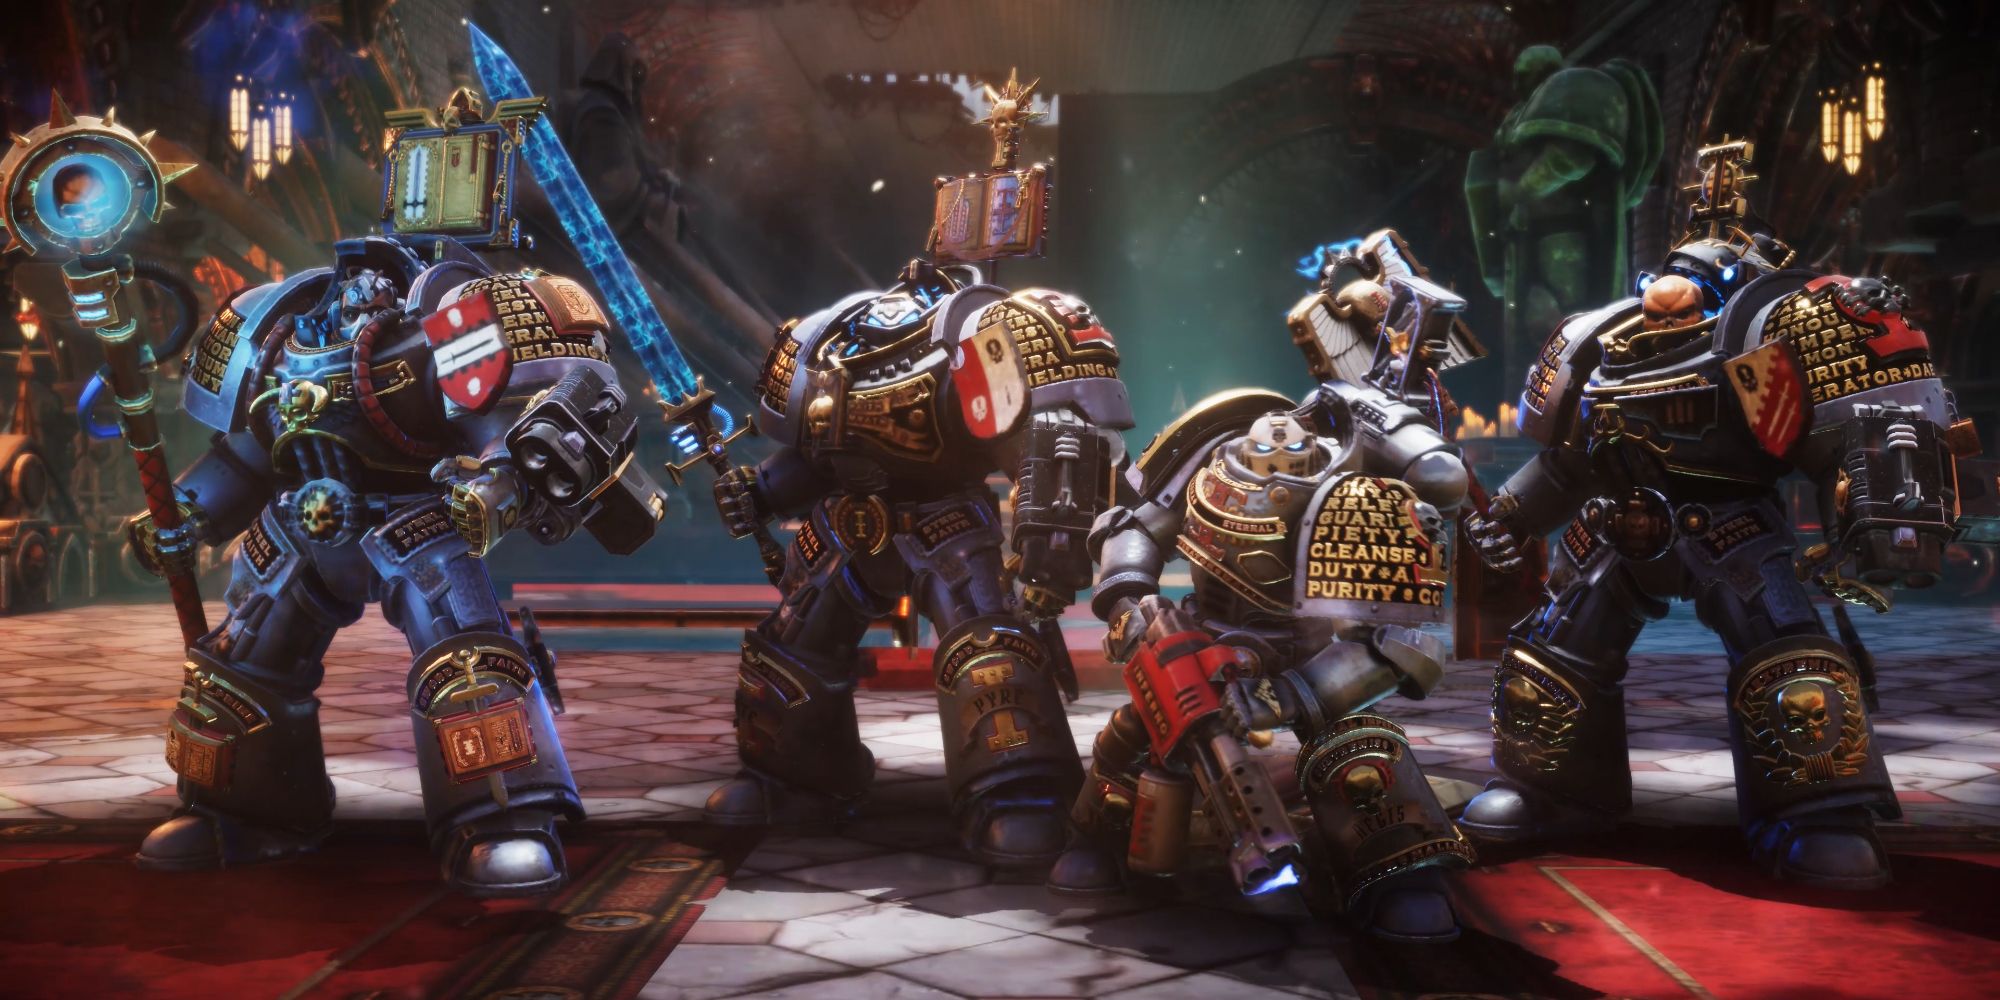 Games Workshop, Frontier Foundry, and Complex Games have just released a new tactical, turned-based RPG called Warhammer 40,000: Chaos Gate - Daemonhunters